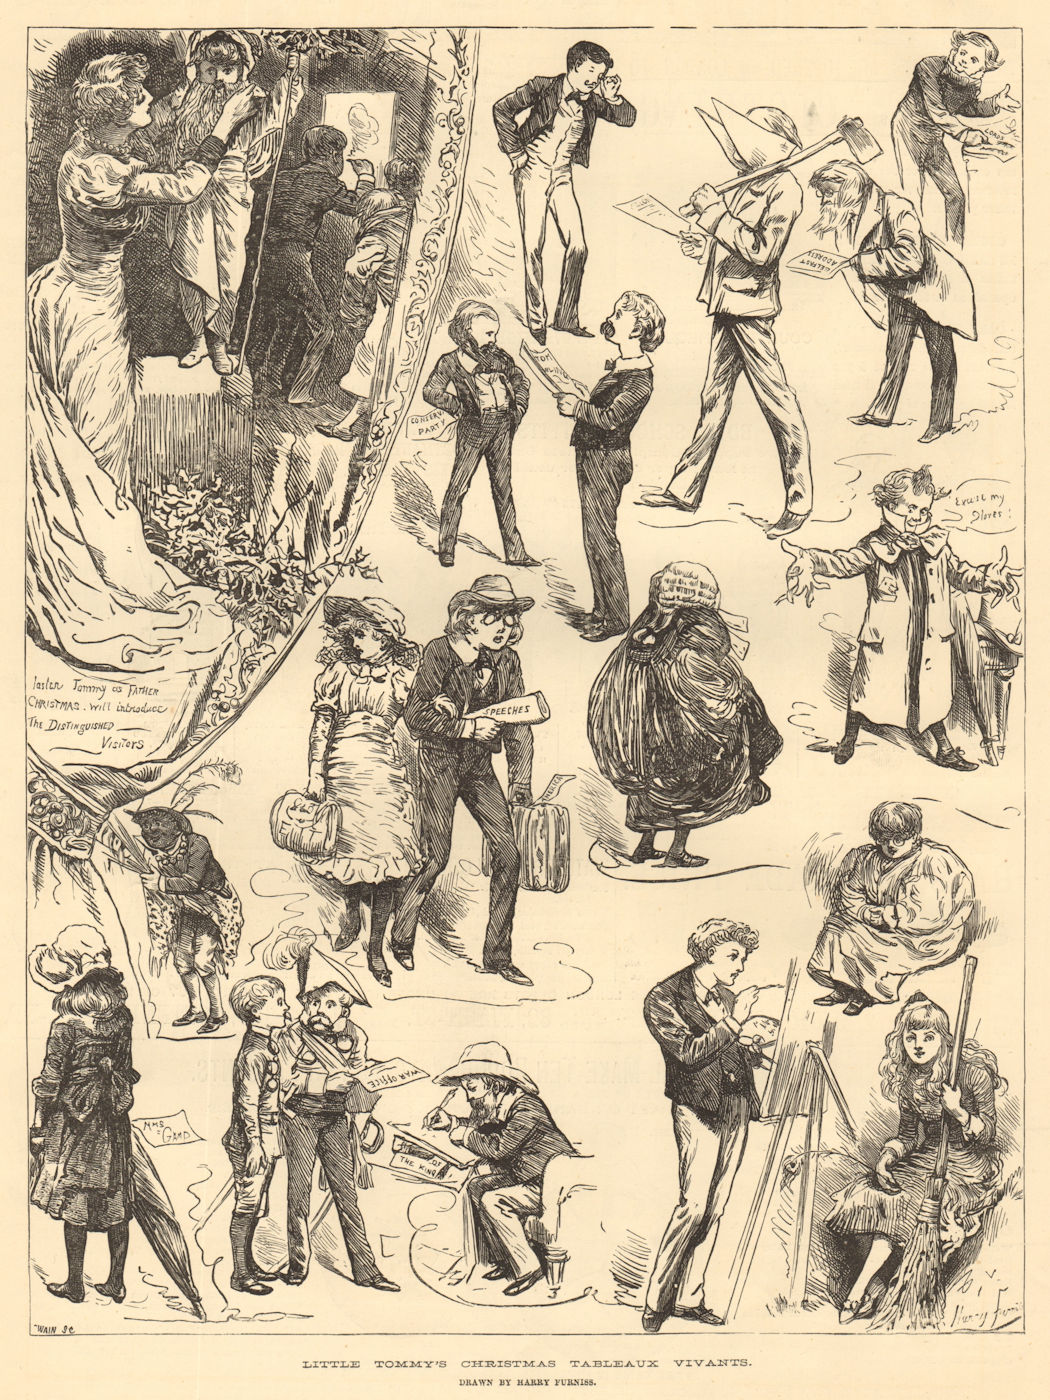 Associate Product Little Tommy's Christmas tableaux vivants. Drawn by Harry Furniss. Society 1883